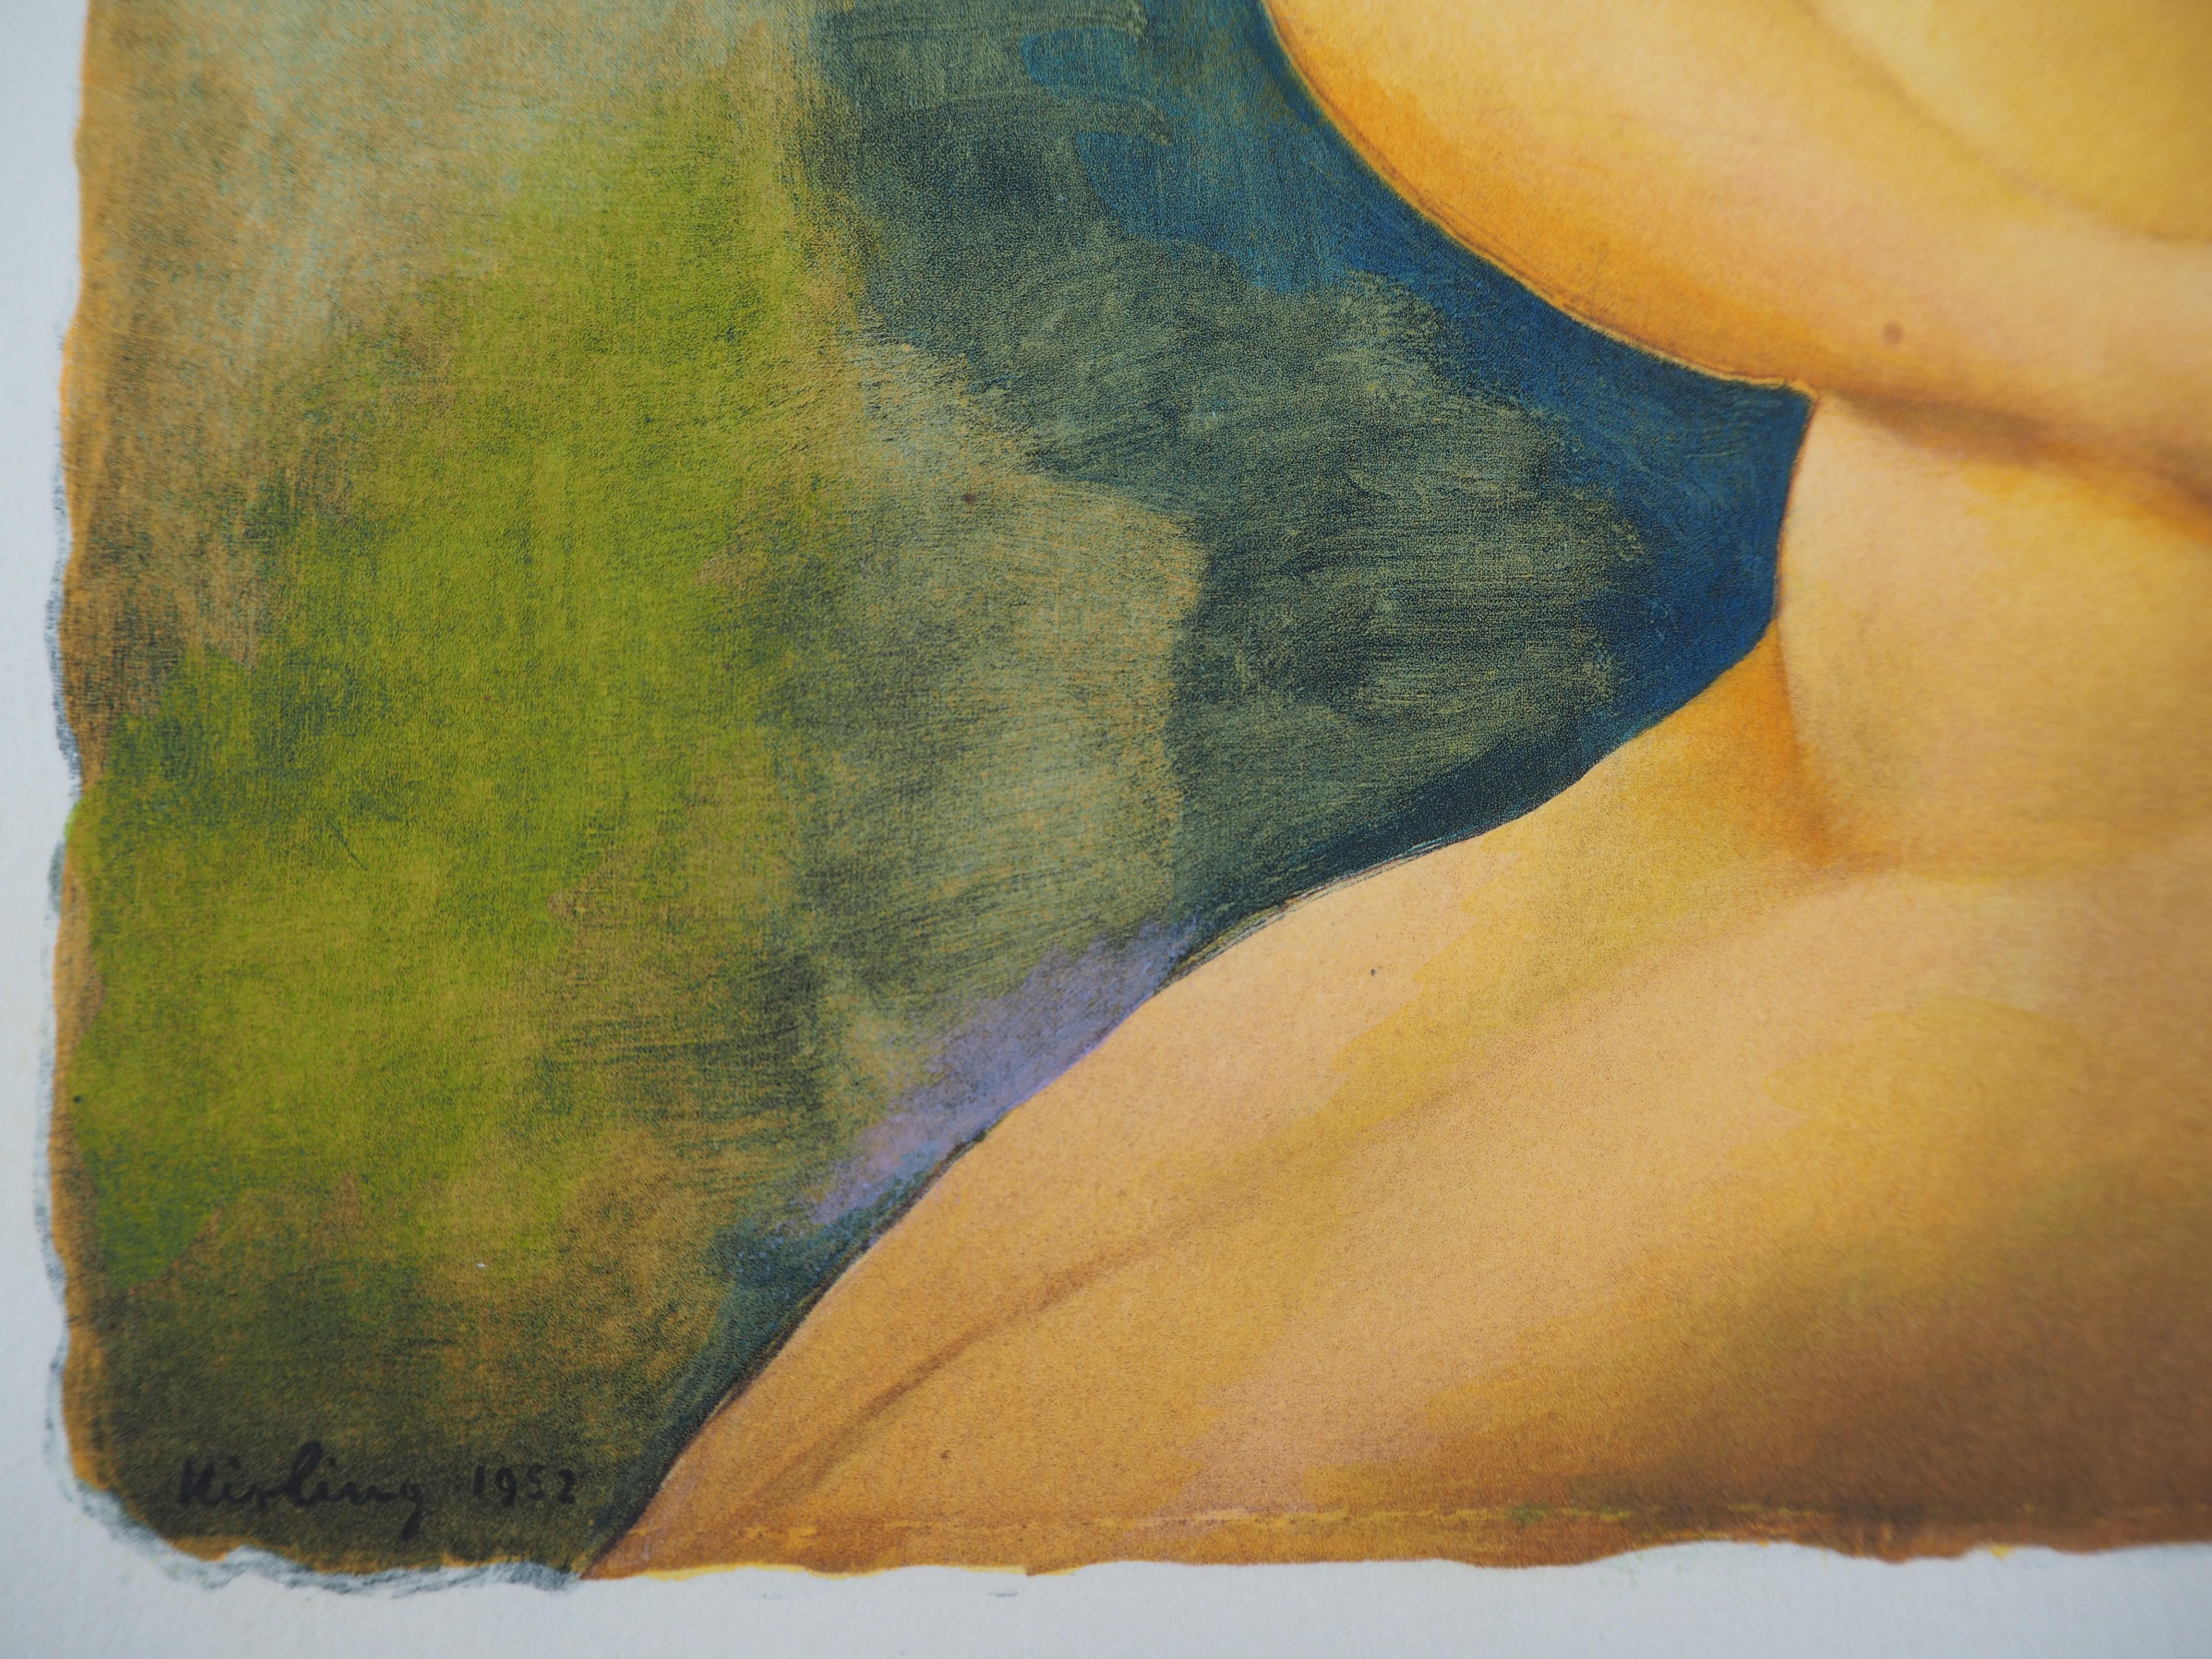 Dreaming Nude - Lithograph - Print by Moise Kisling